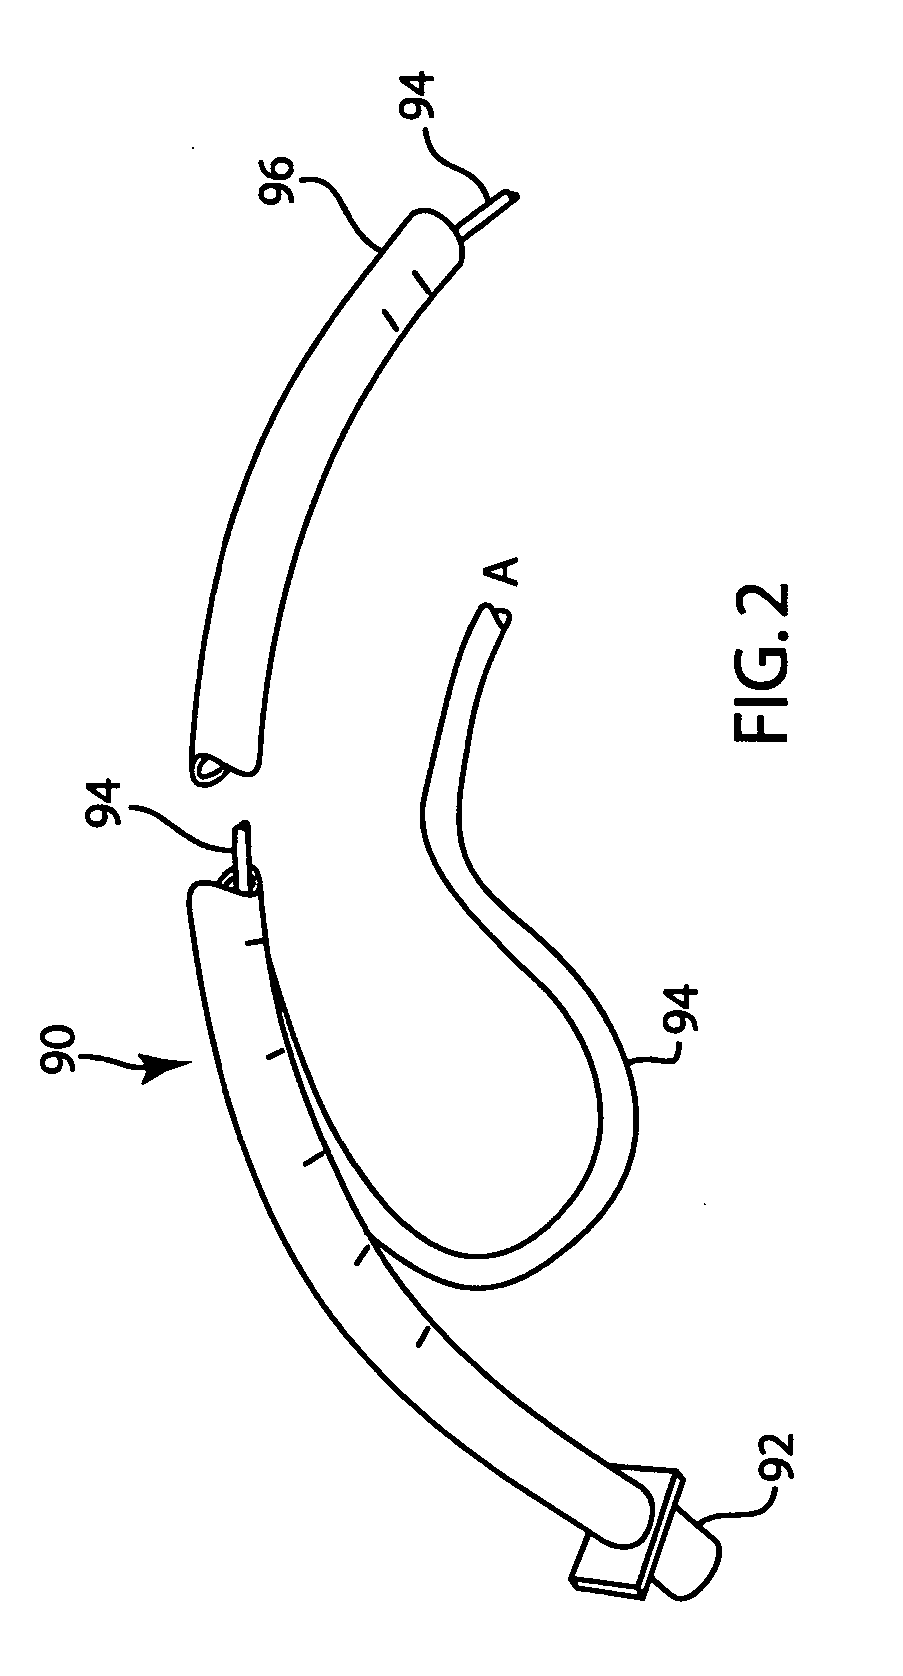 Apparatus and method for identifying FRC and PEEP characteristics